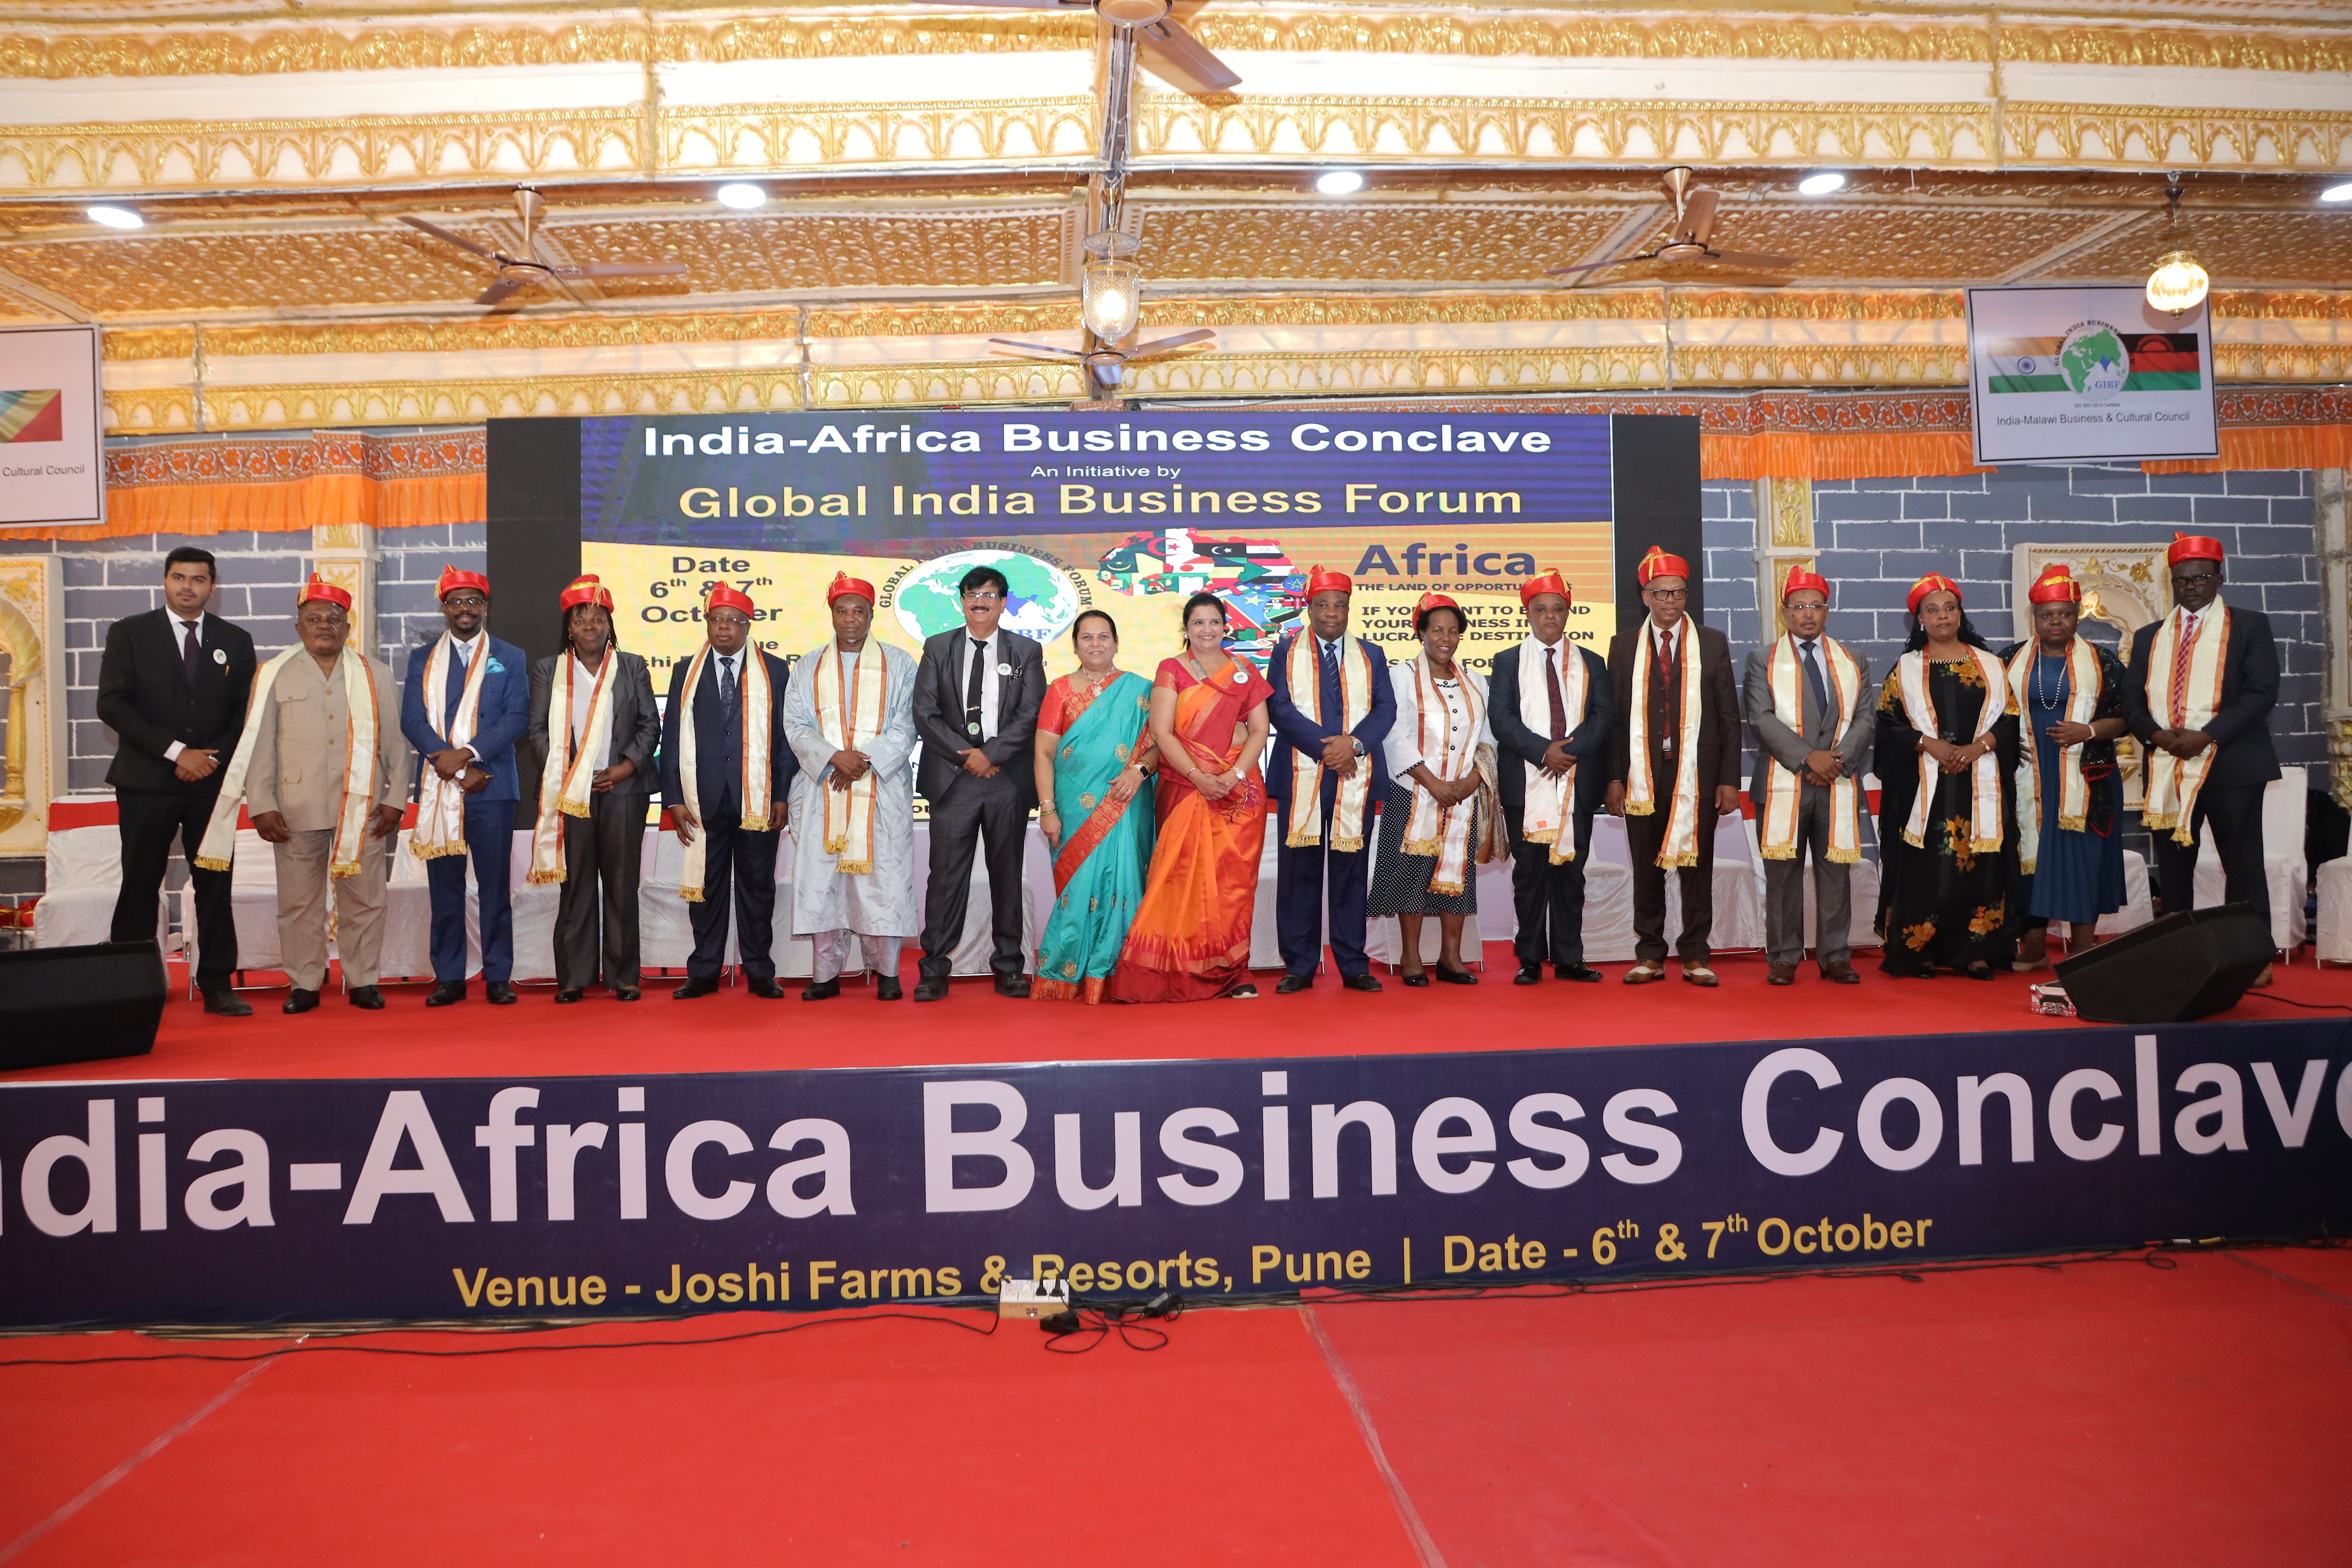 Grow Together, is a success mantra for futuristic business between India & Africa:  Dr. Jitendra Joshi